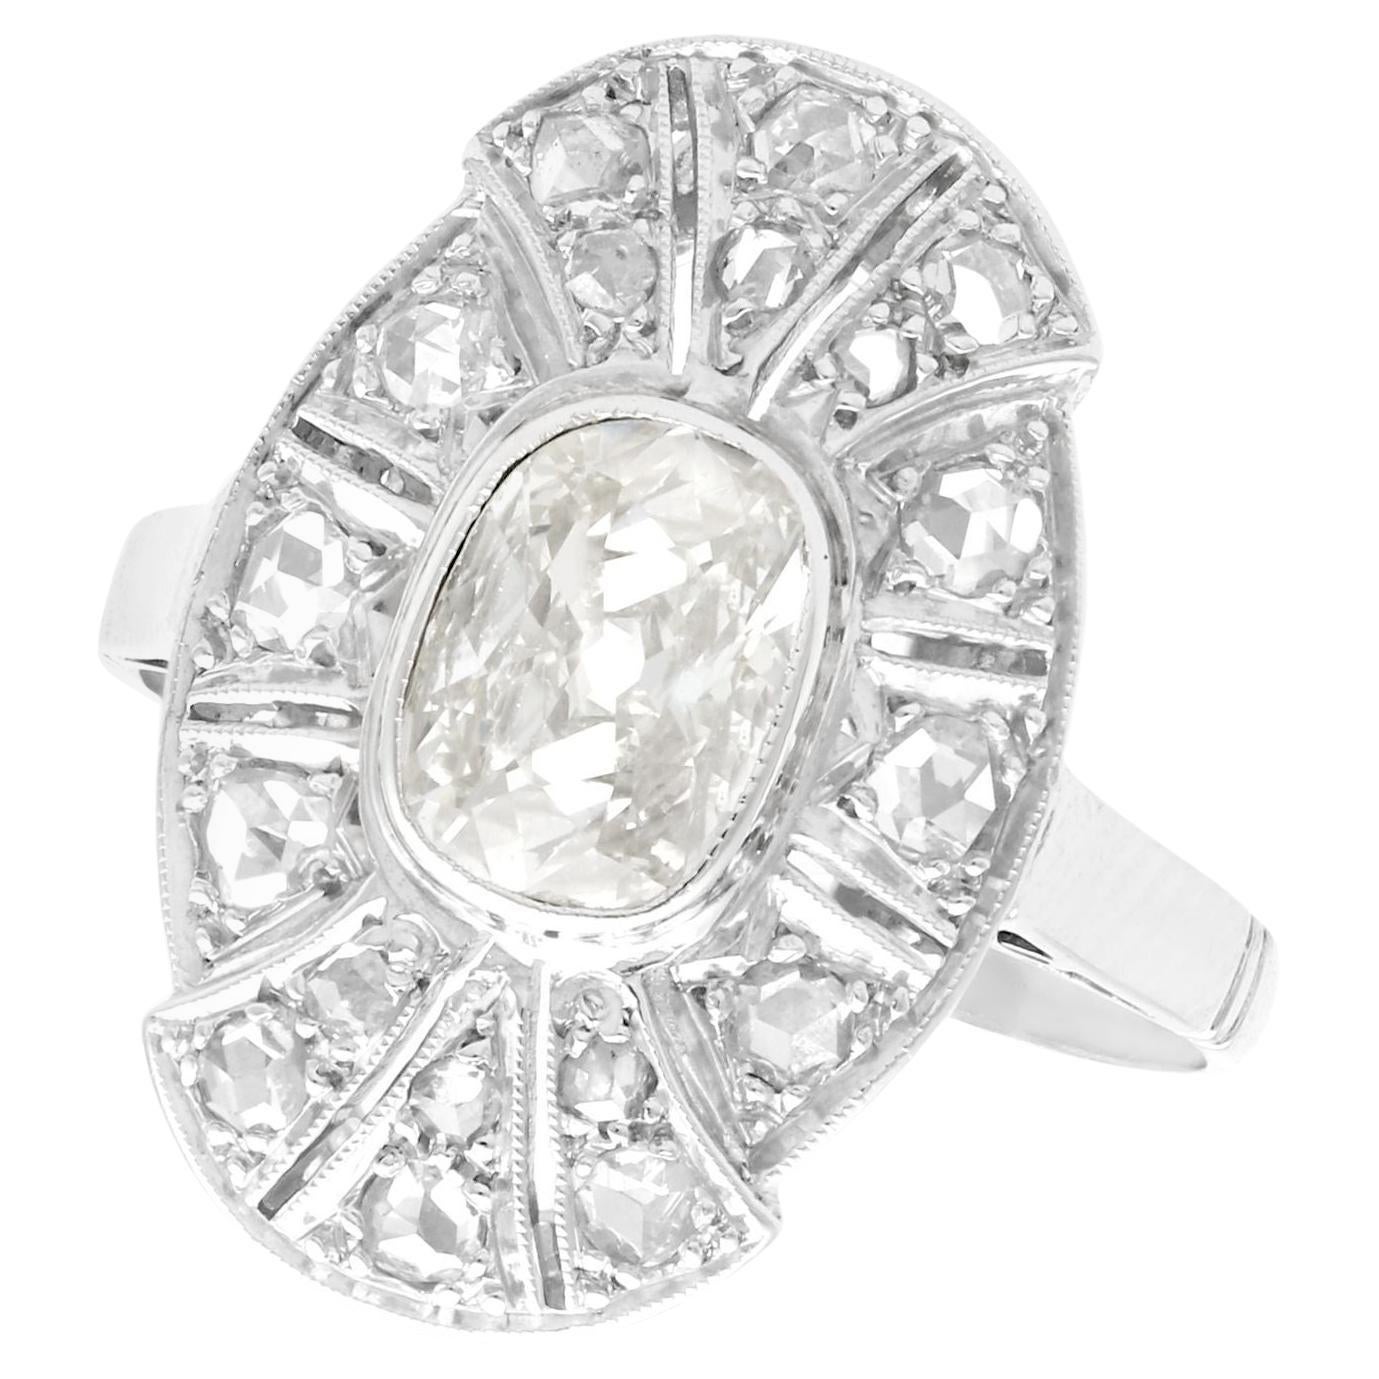 Antique 1.79 Carat Diamond and White Gold Cocktail Ring, Circa 1930 For Sale